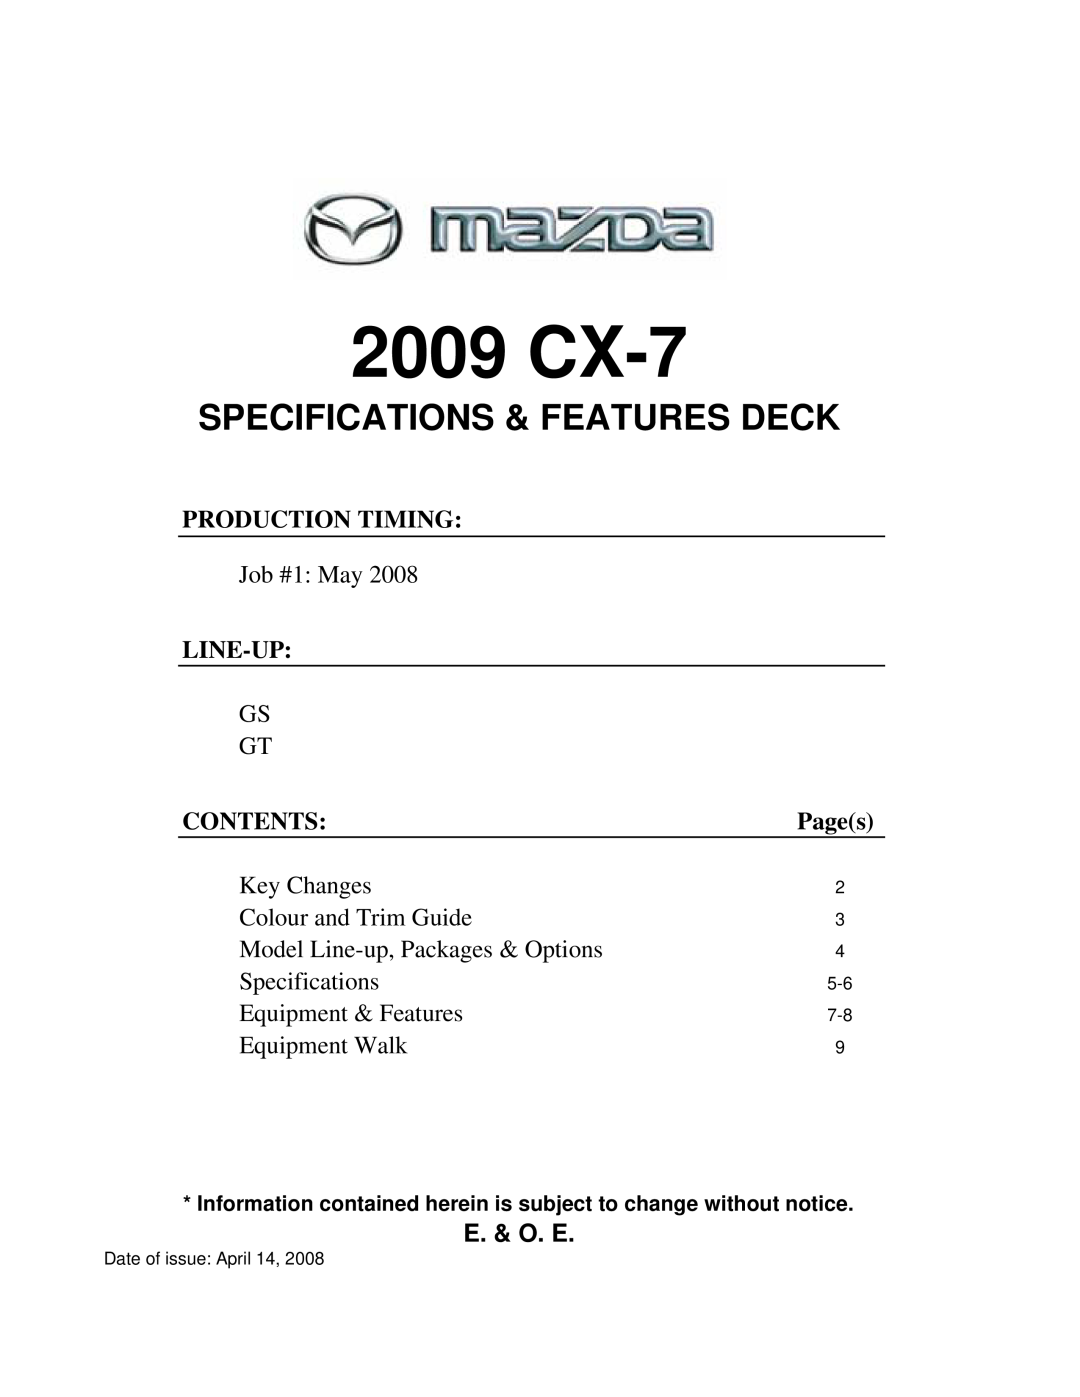 Mazda 2009 CX-7 specifications E. & O. E, Information contained herein is subject to change without notice, Job #1 May 